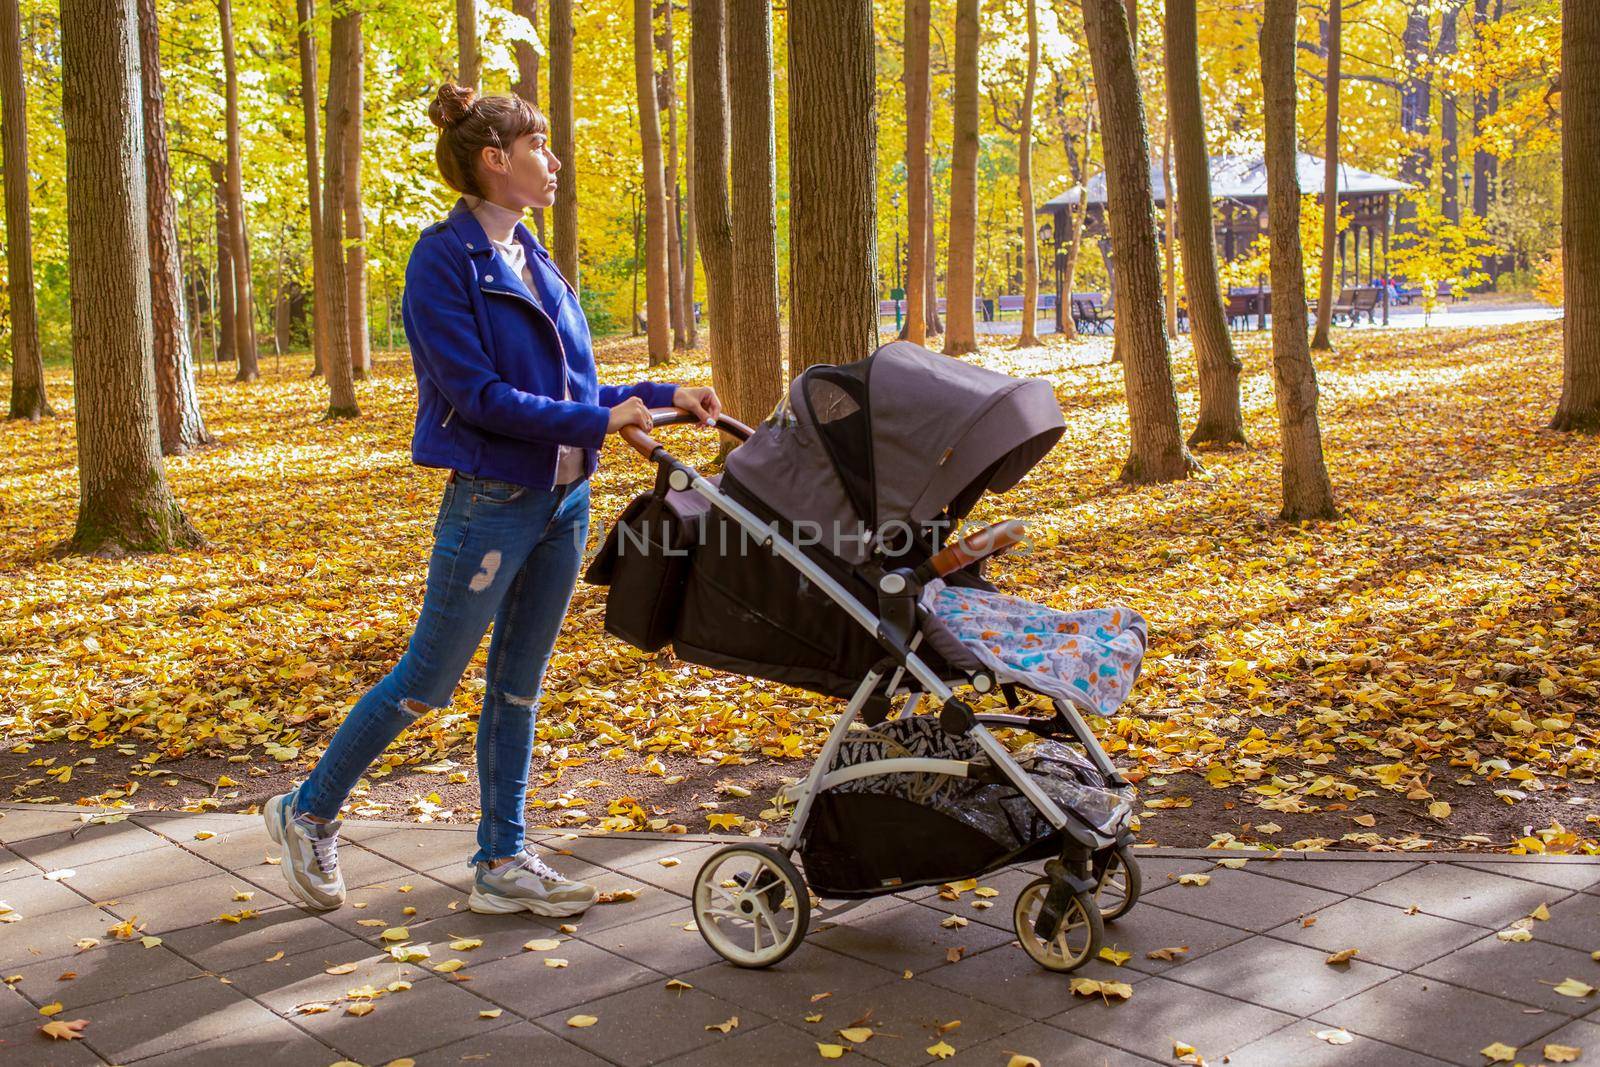 young mother goes with a stroller in the autumn park. a one-year-old infant is sleeping in a carriage. tired mom